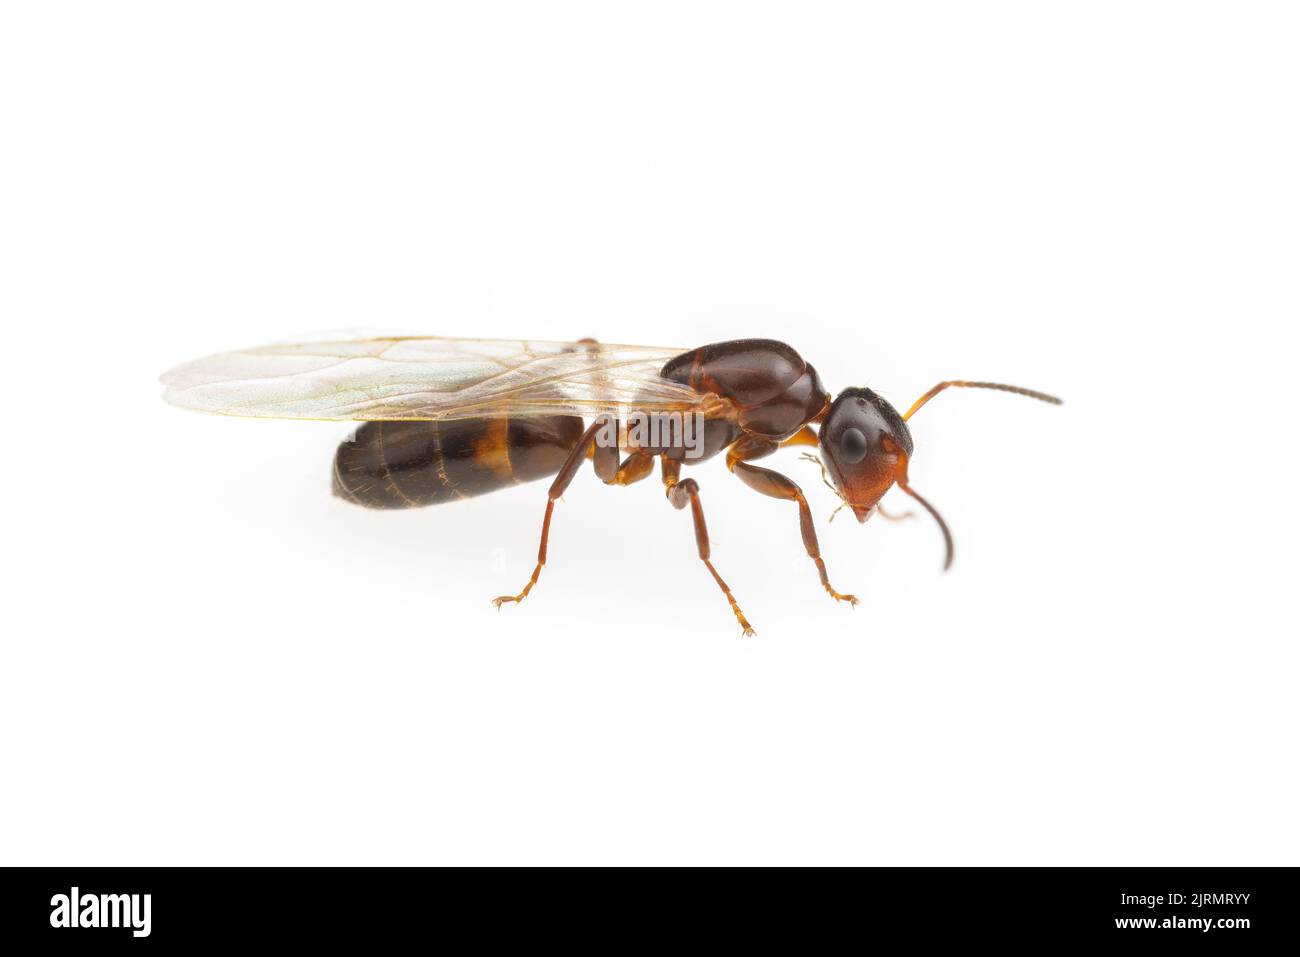 A Mississippi Gate-keeper Ant (Colobopsis mississippiensis) queen during a nuptial flight, isolated on white background. Stock Photo